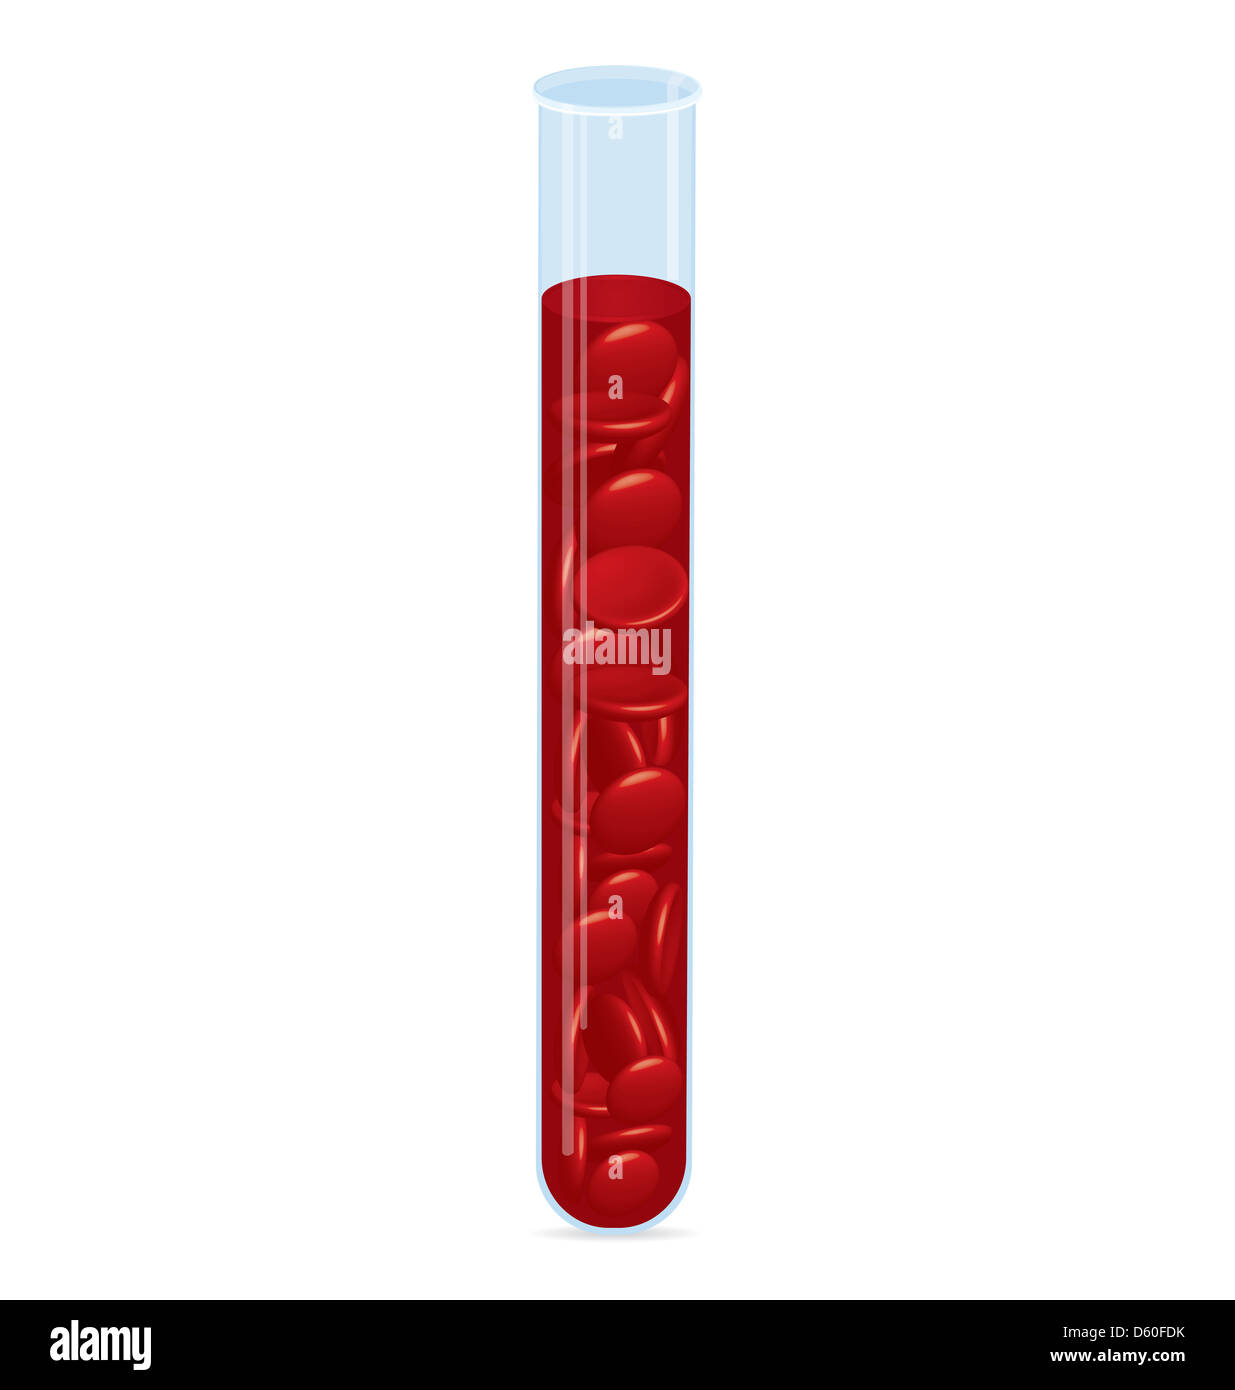 Blood cell test tube Stock Photo